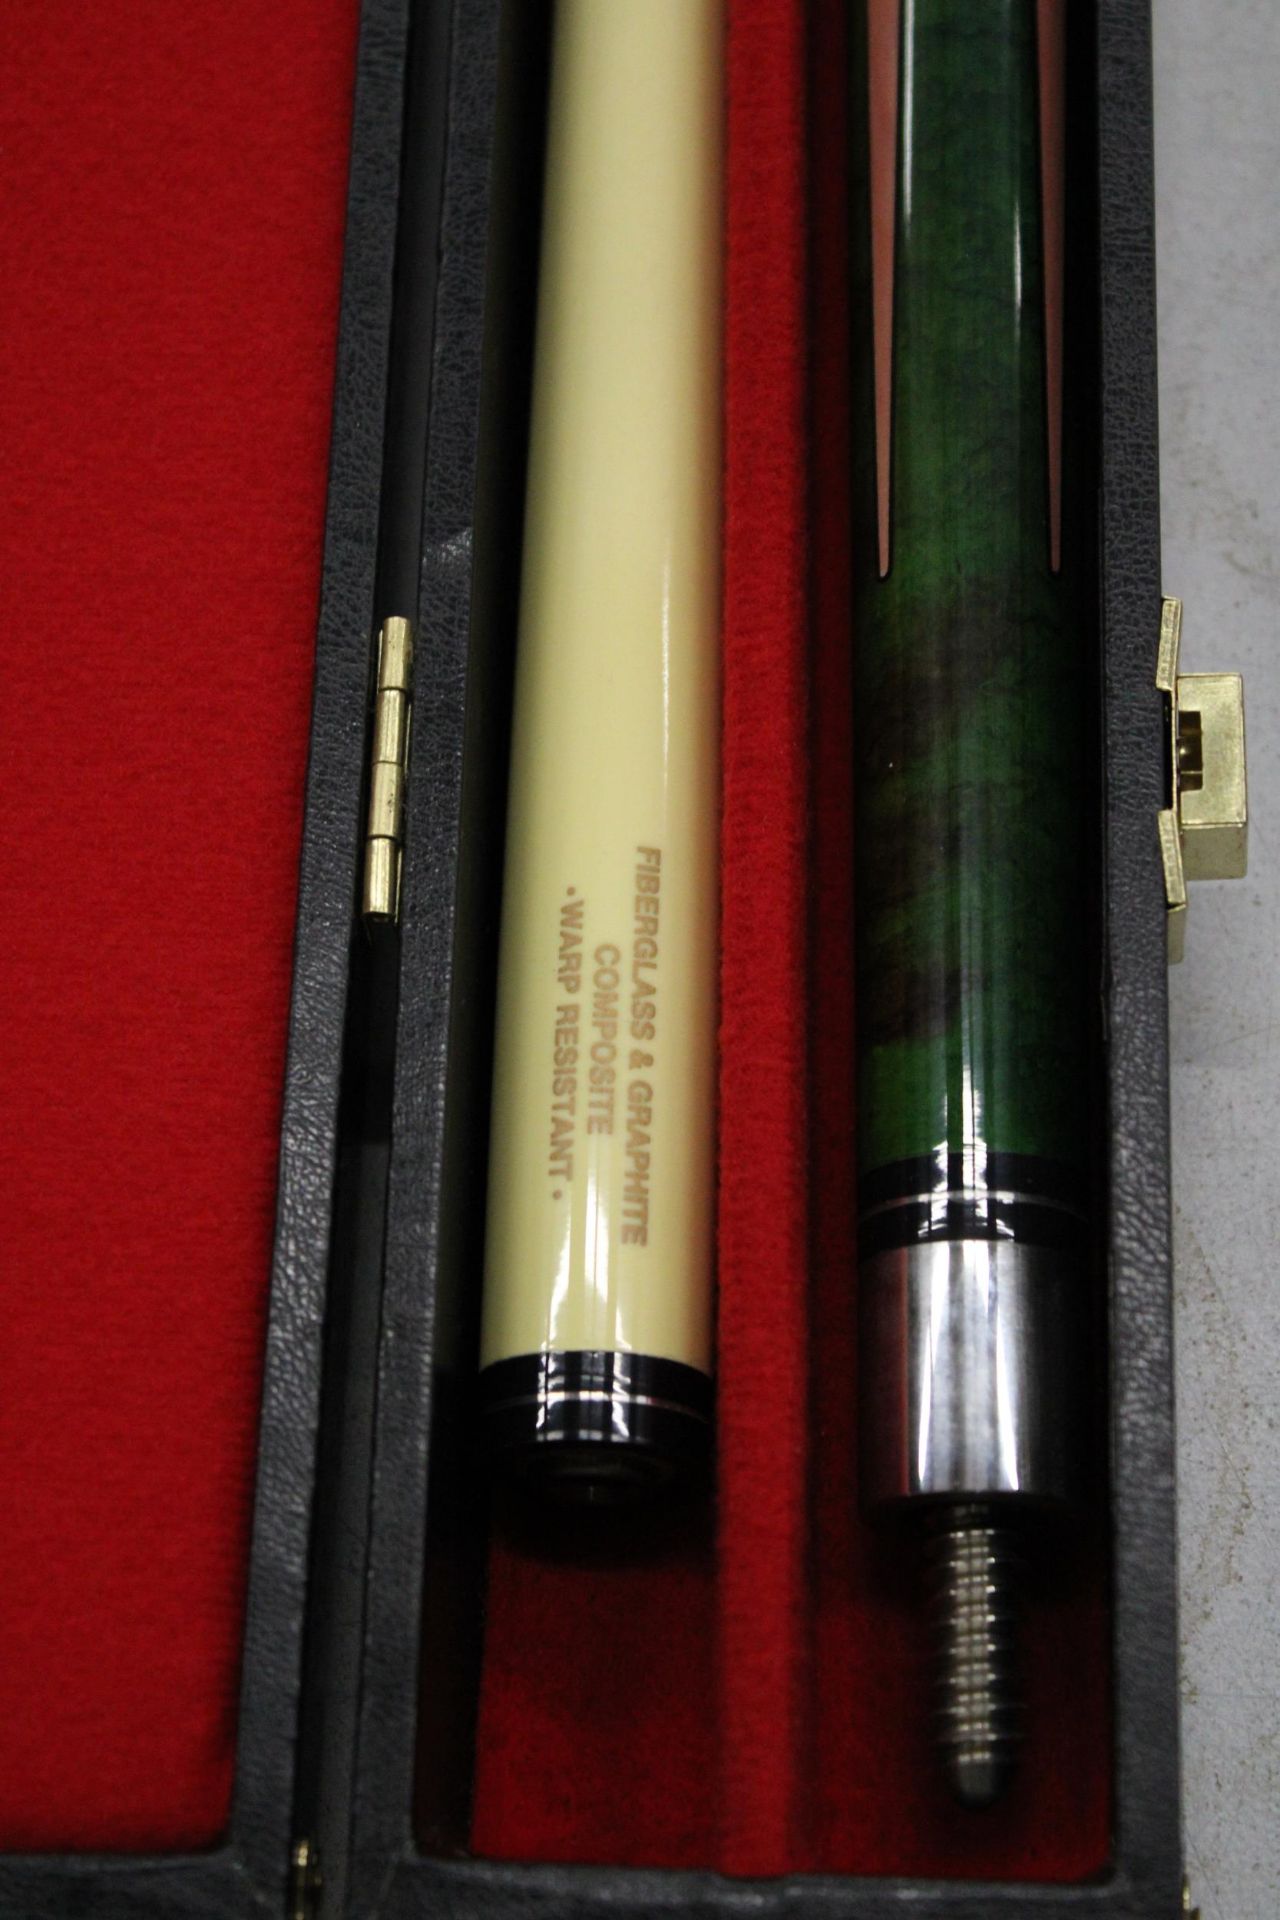 A DECORATIVE POOL CUE IN A HARD CASE - Image 3 of 5